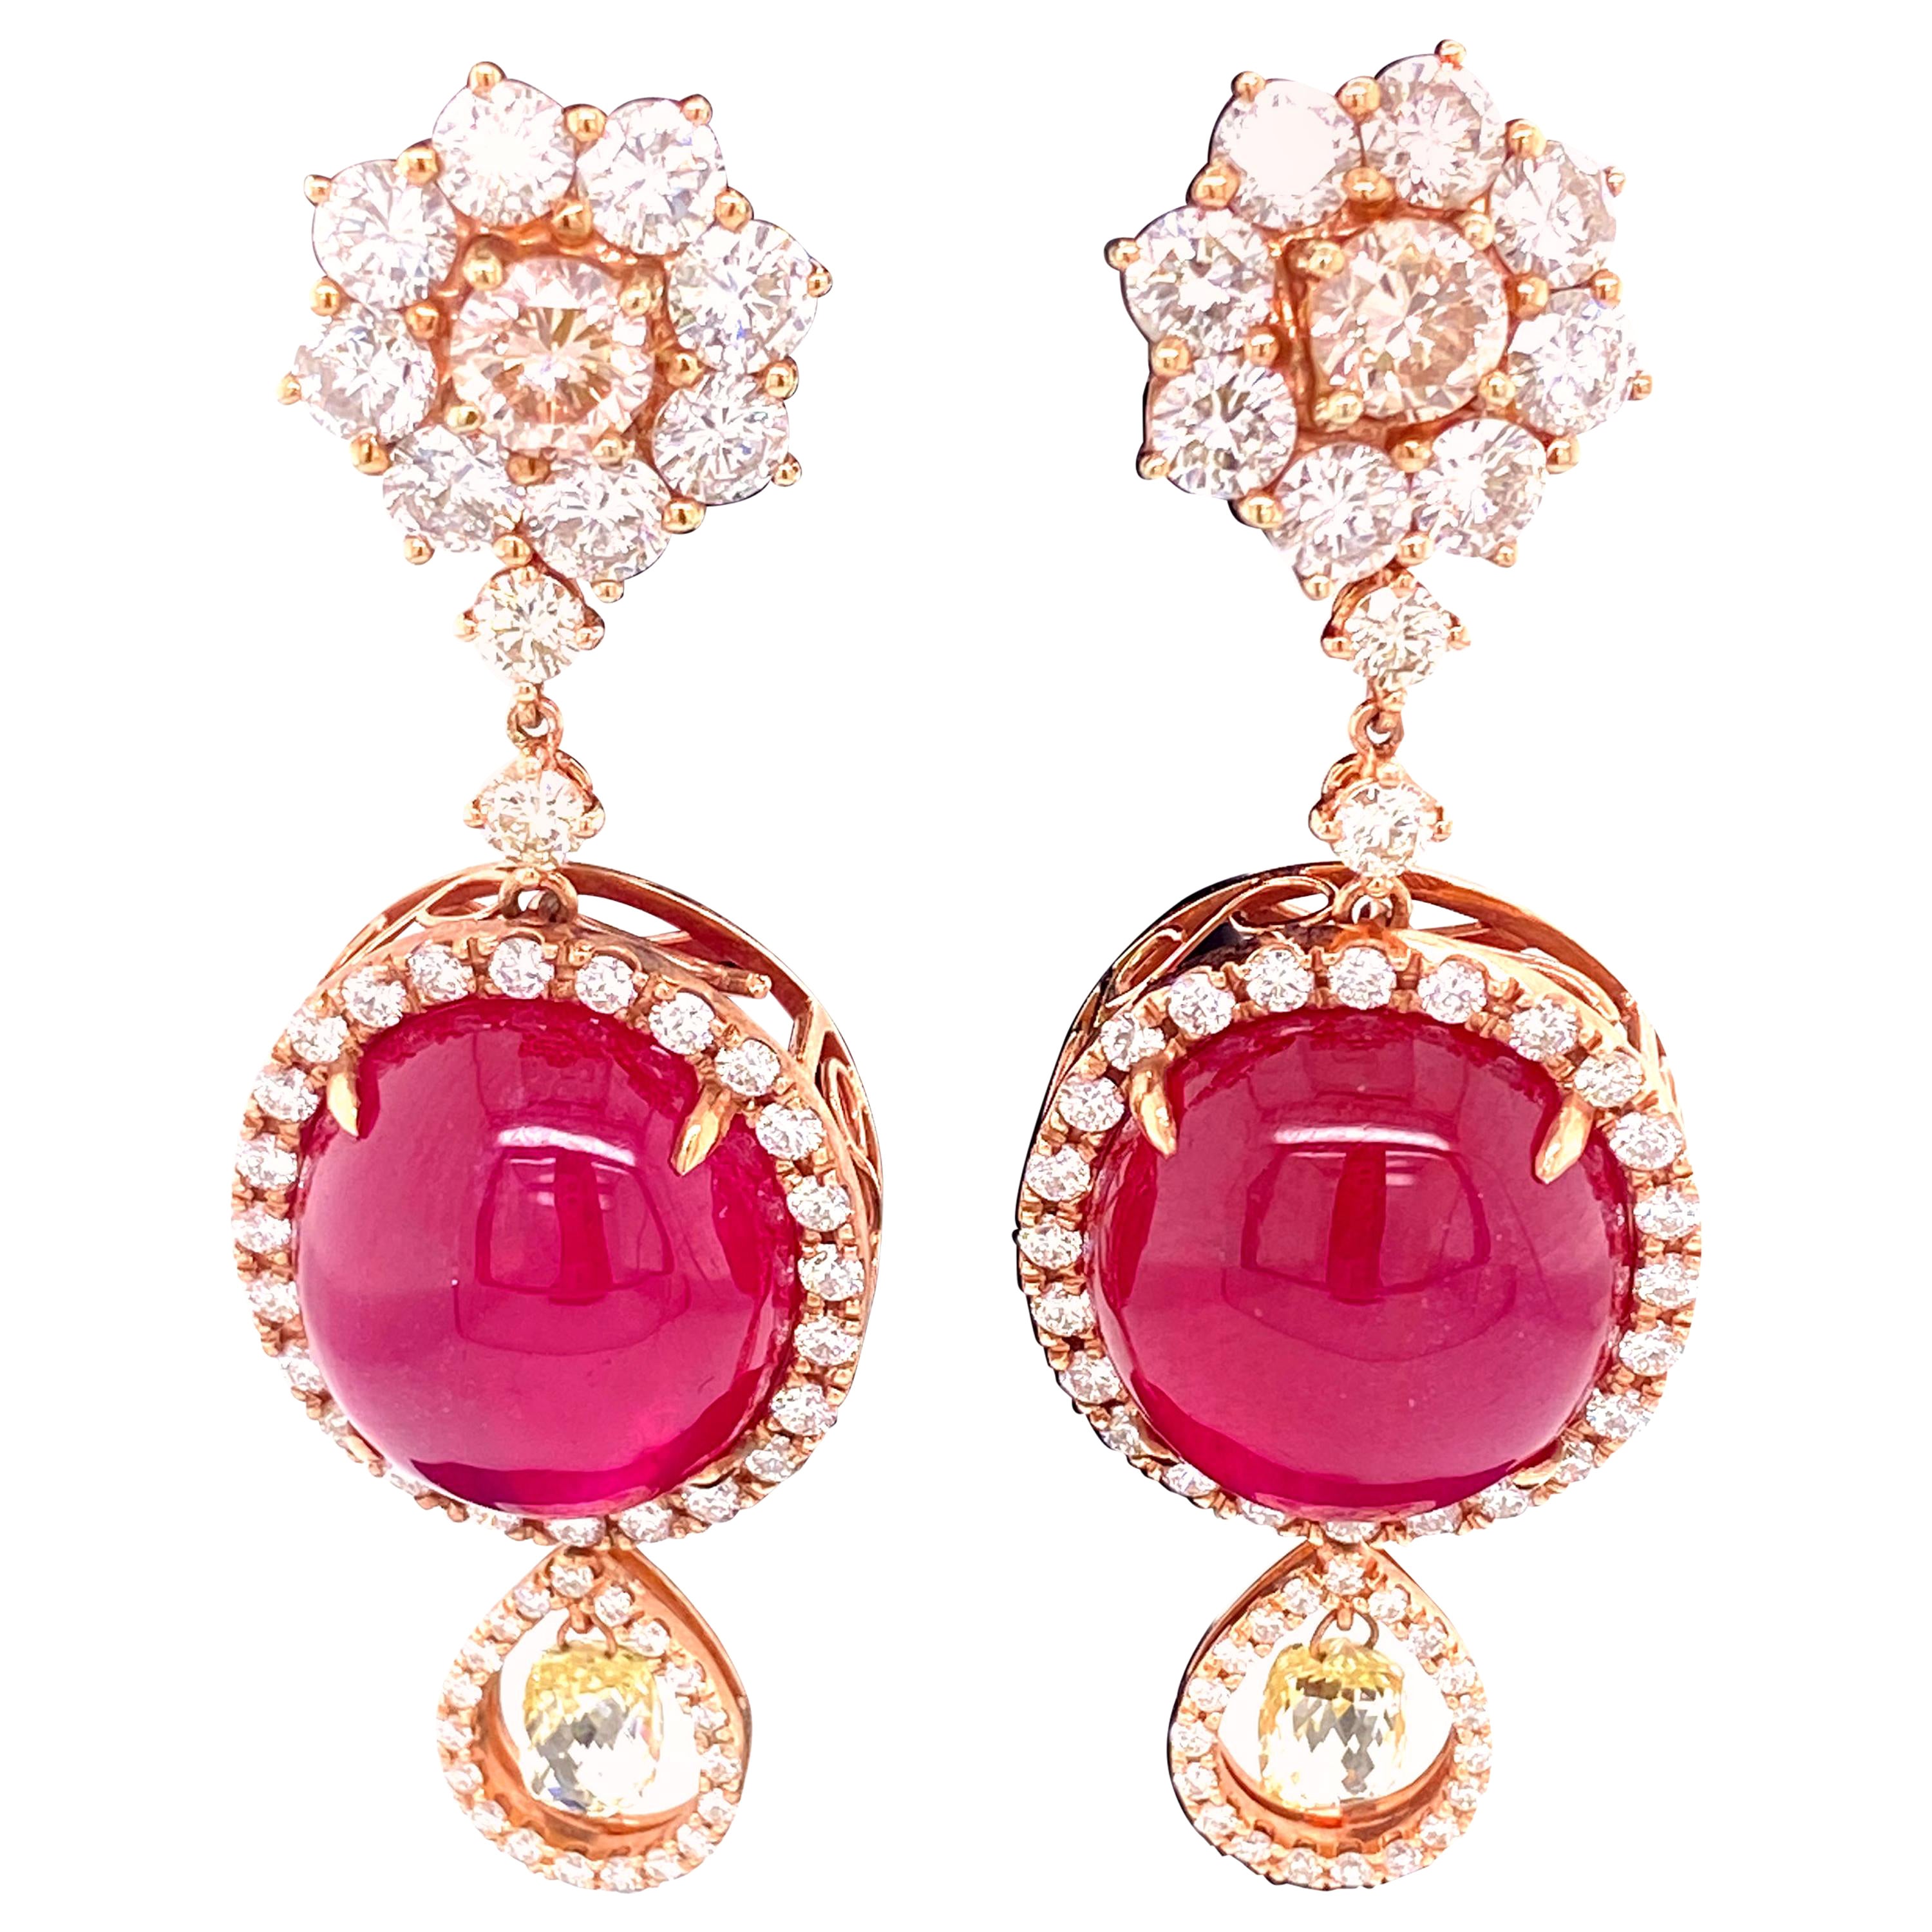 42.02 Carat Ruby Cabochon, Pink Diamond, and Diamond Briolette Gold Earrings